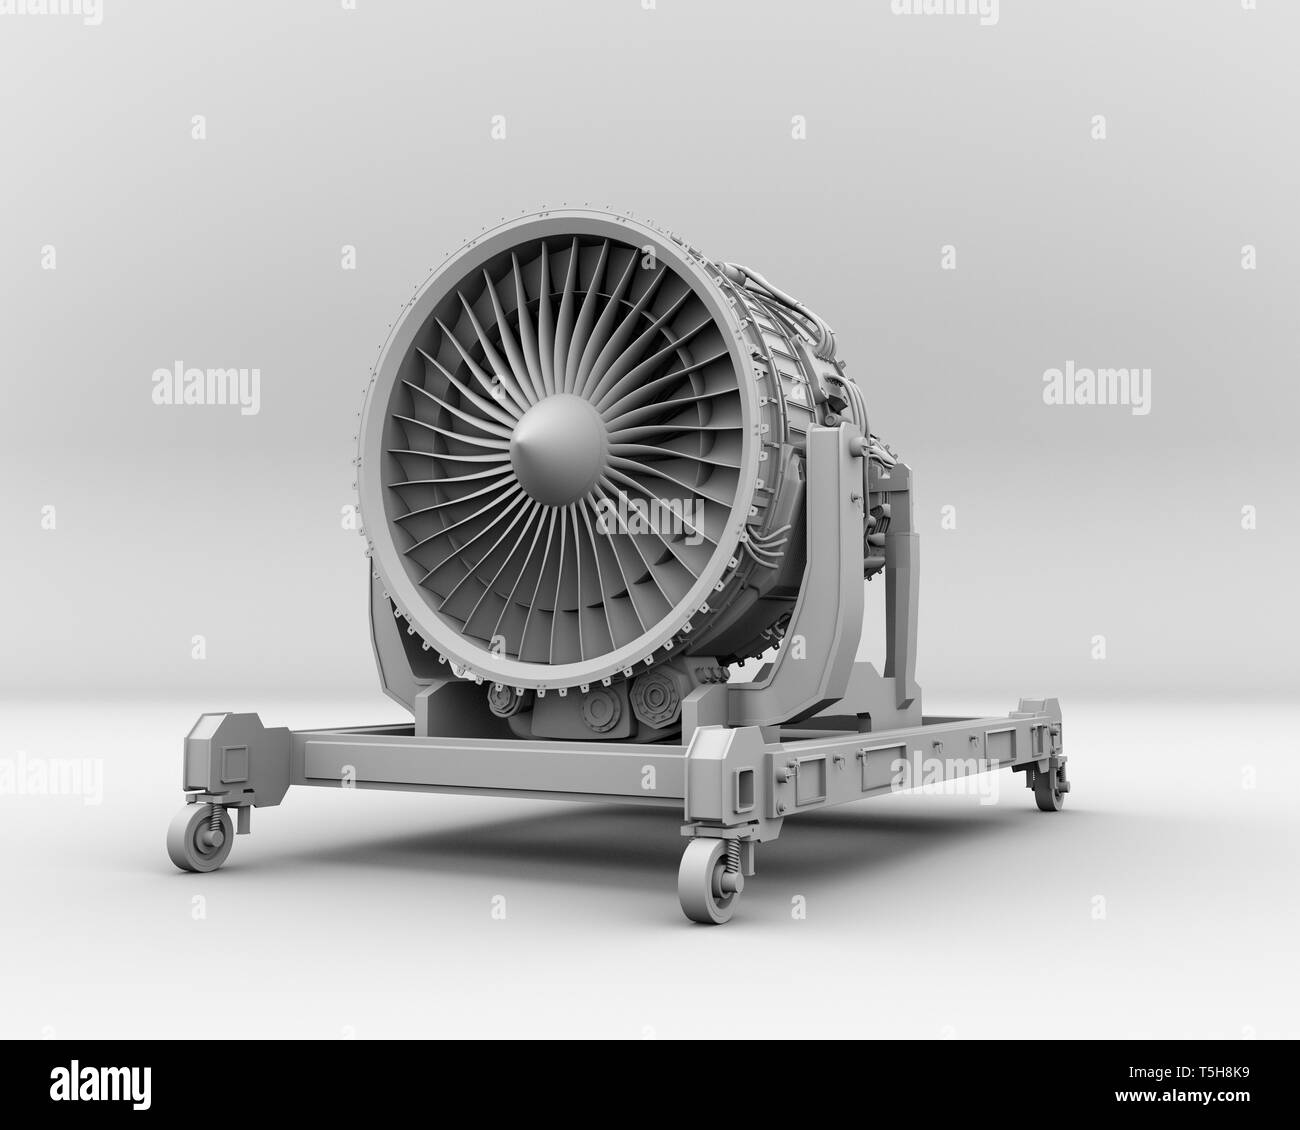 Clay rendering of turbojet engine on gray background. 3D rendering image. Stock Photo